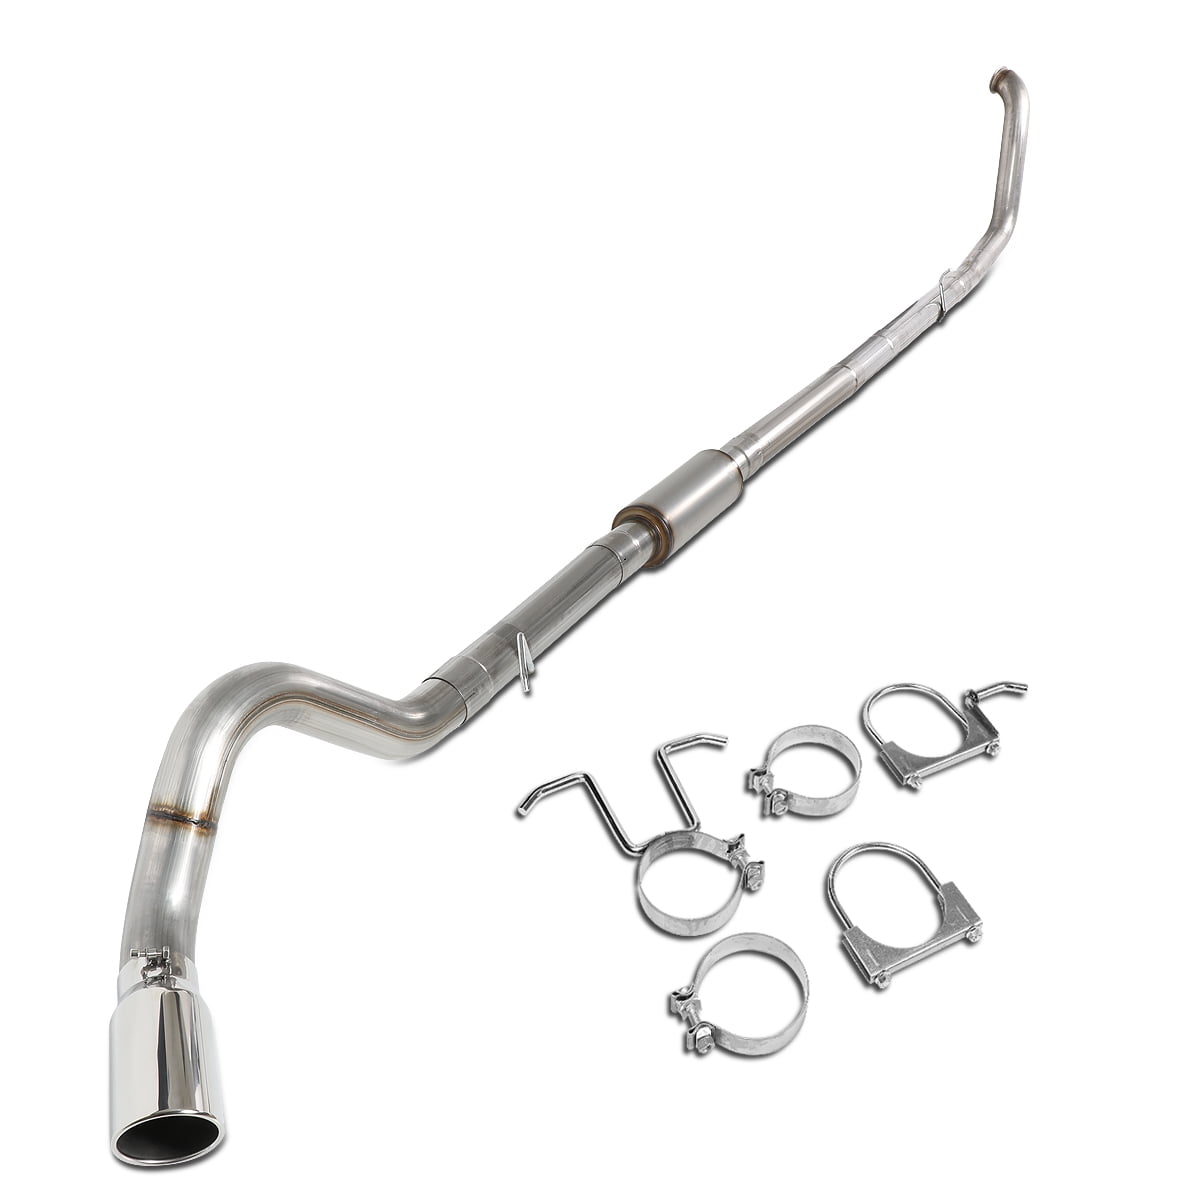 For 1999 to 2003 Ford F250 F350 Super Duty 7.3L Diesel 4"OD Piping Turbo Catback Exhaust System 1999 Ford F250 Super Duty Exhaust System